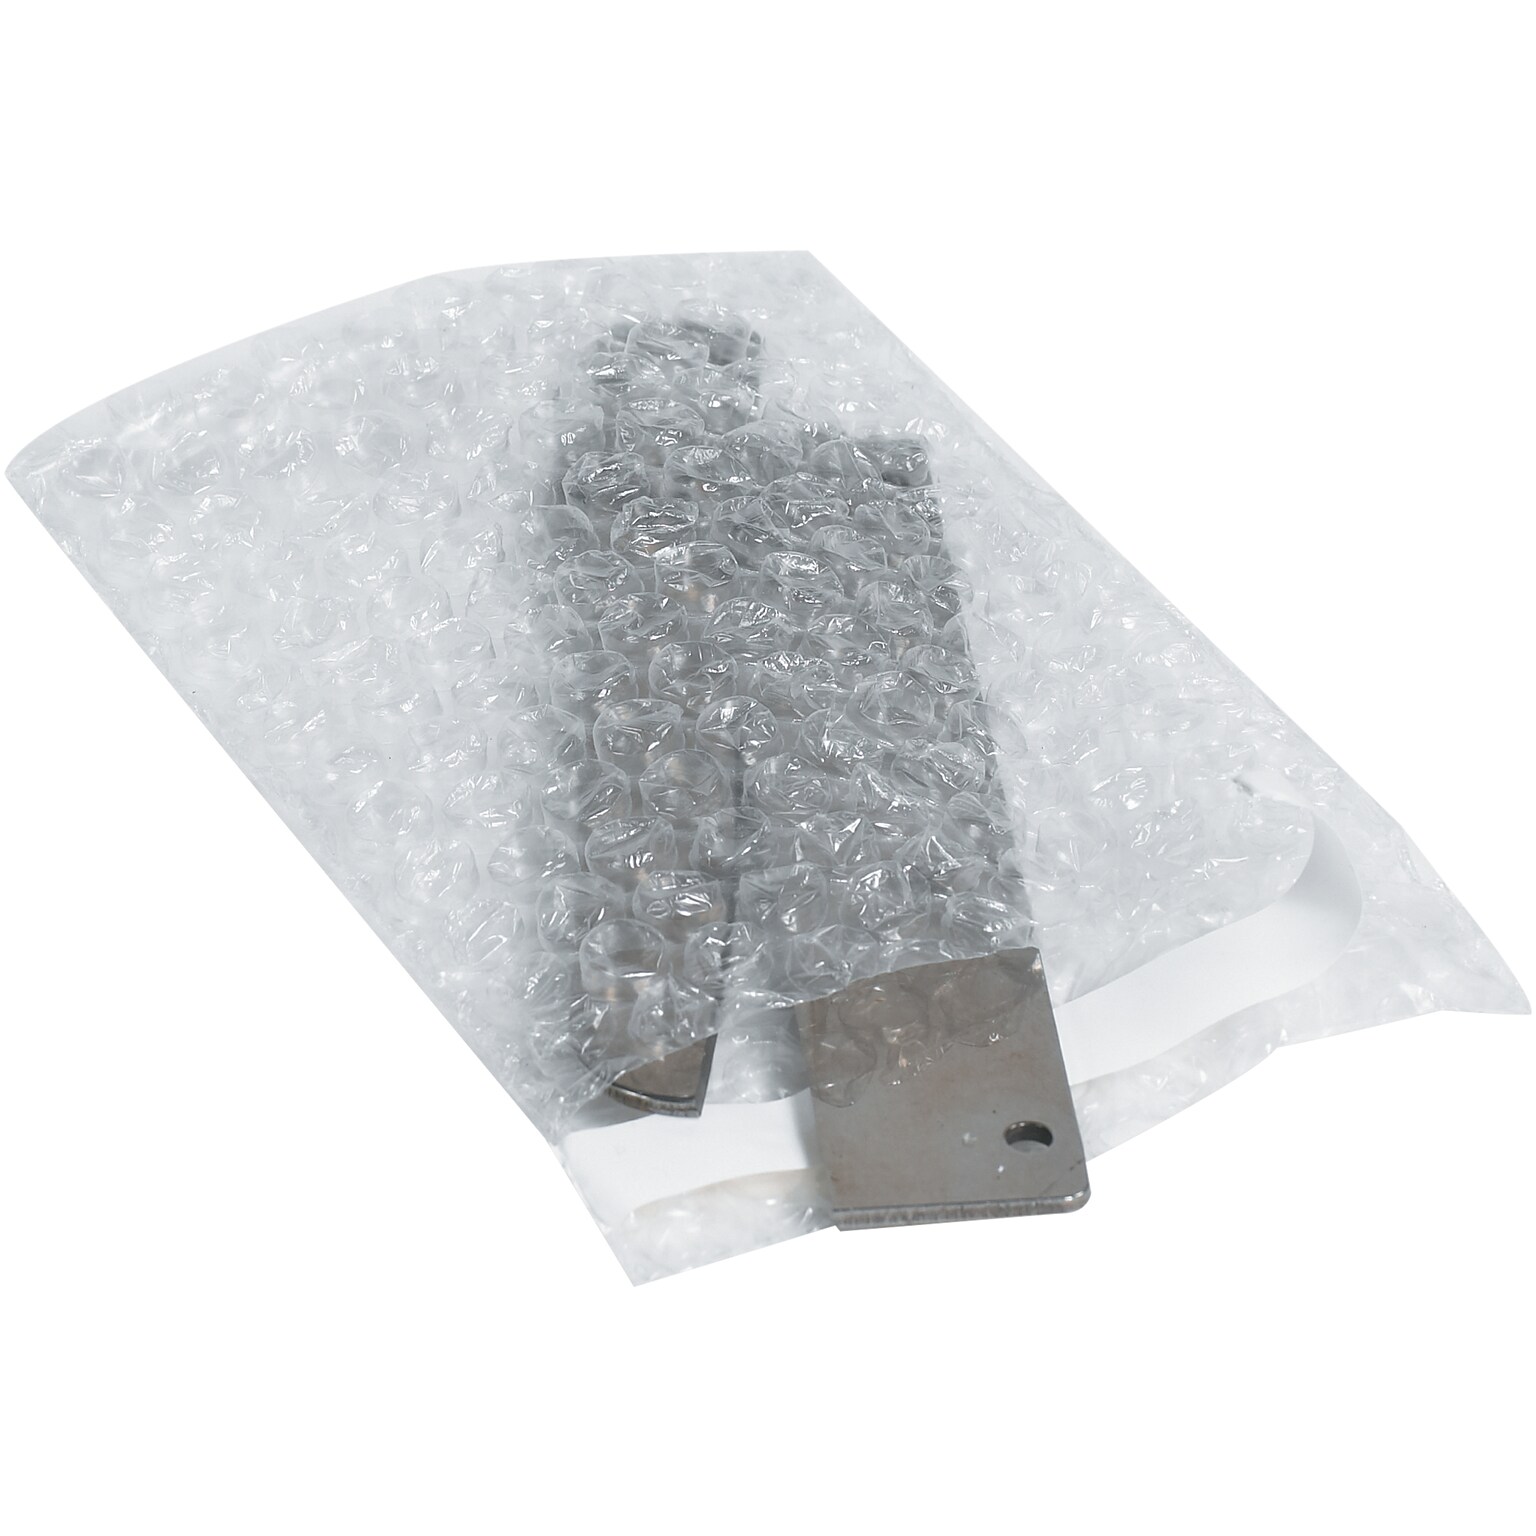 5 x 10 1/2 - Quill Brand® Self-Seal Bubble Pouches, 250/Case